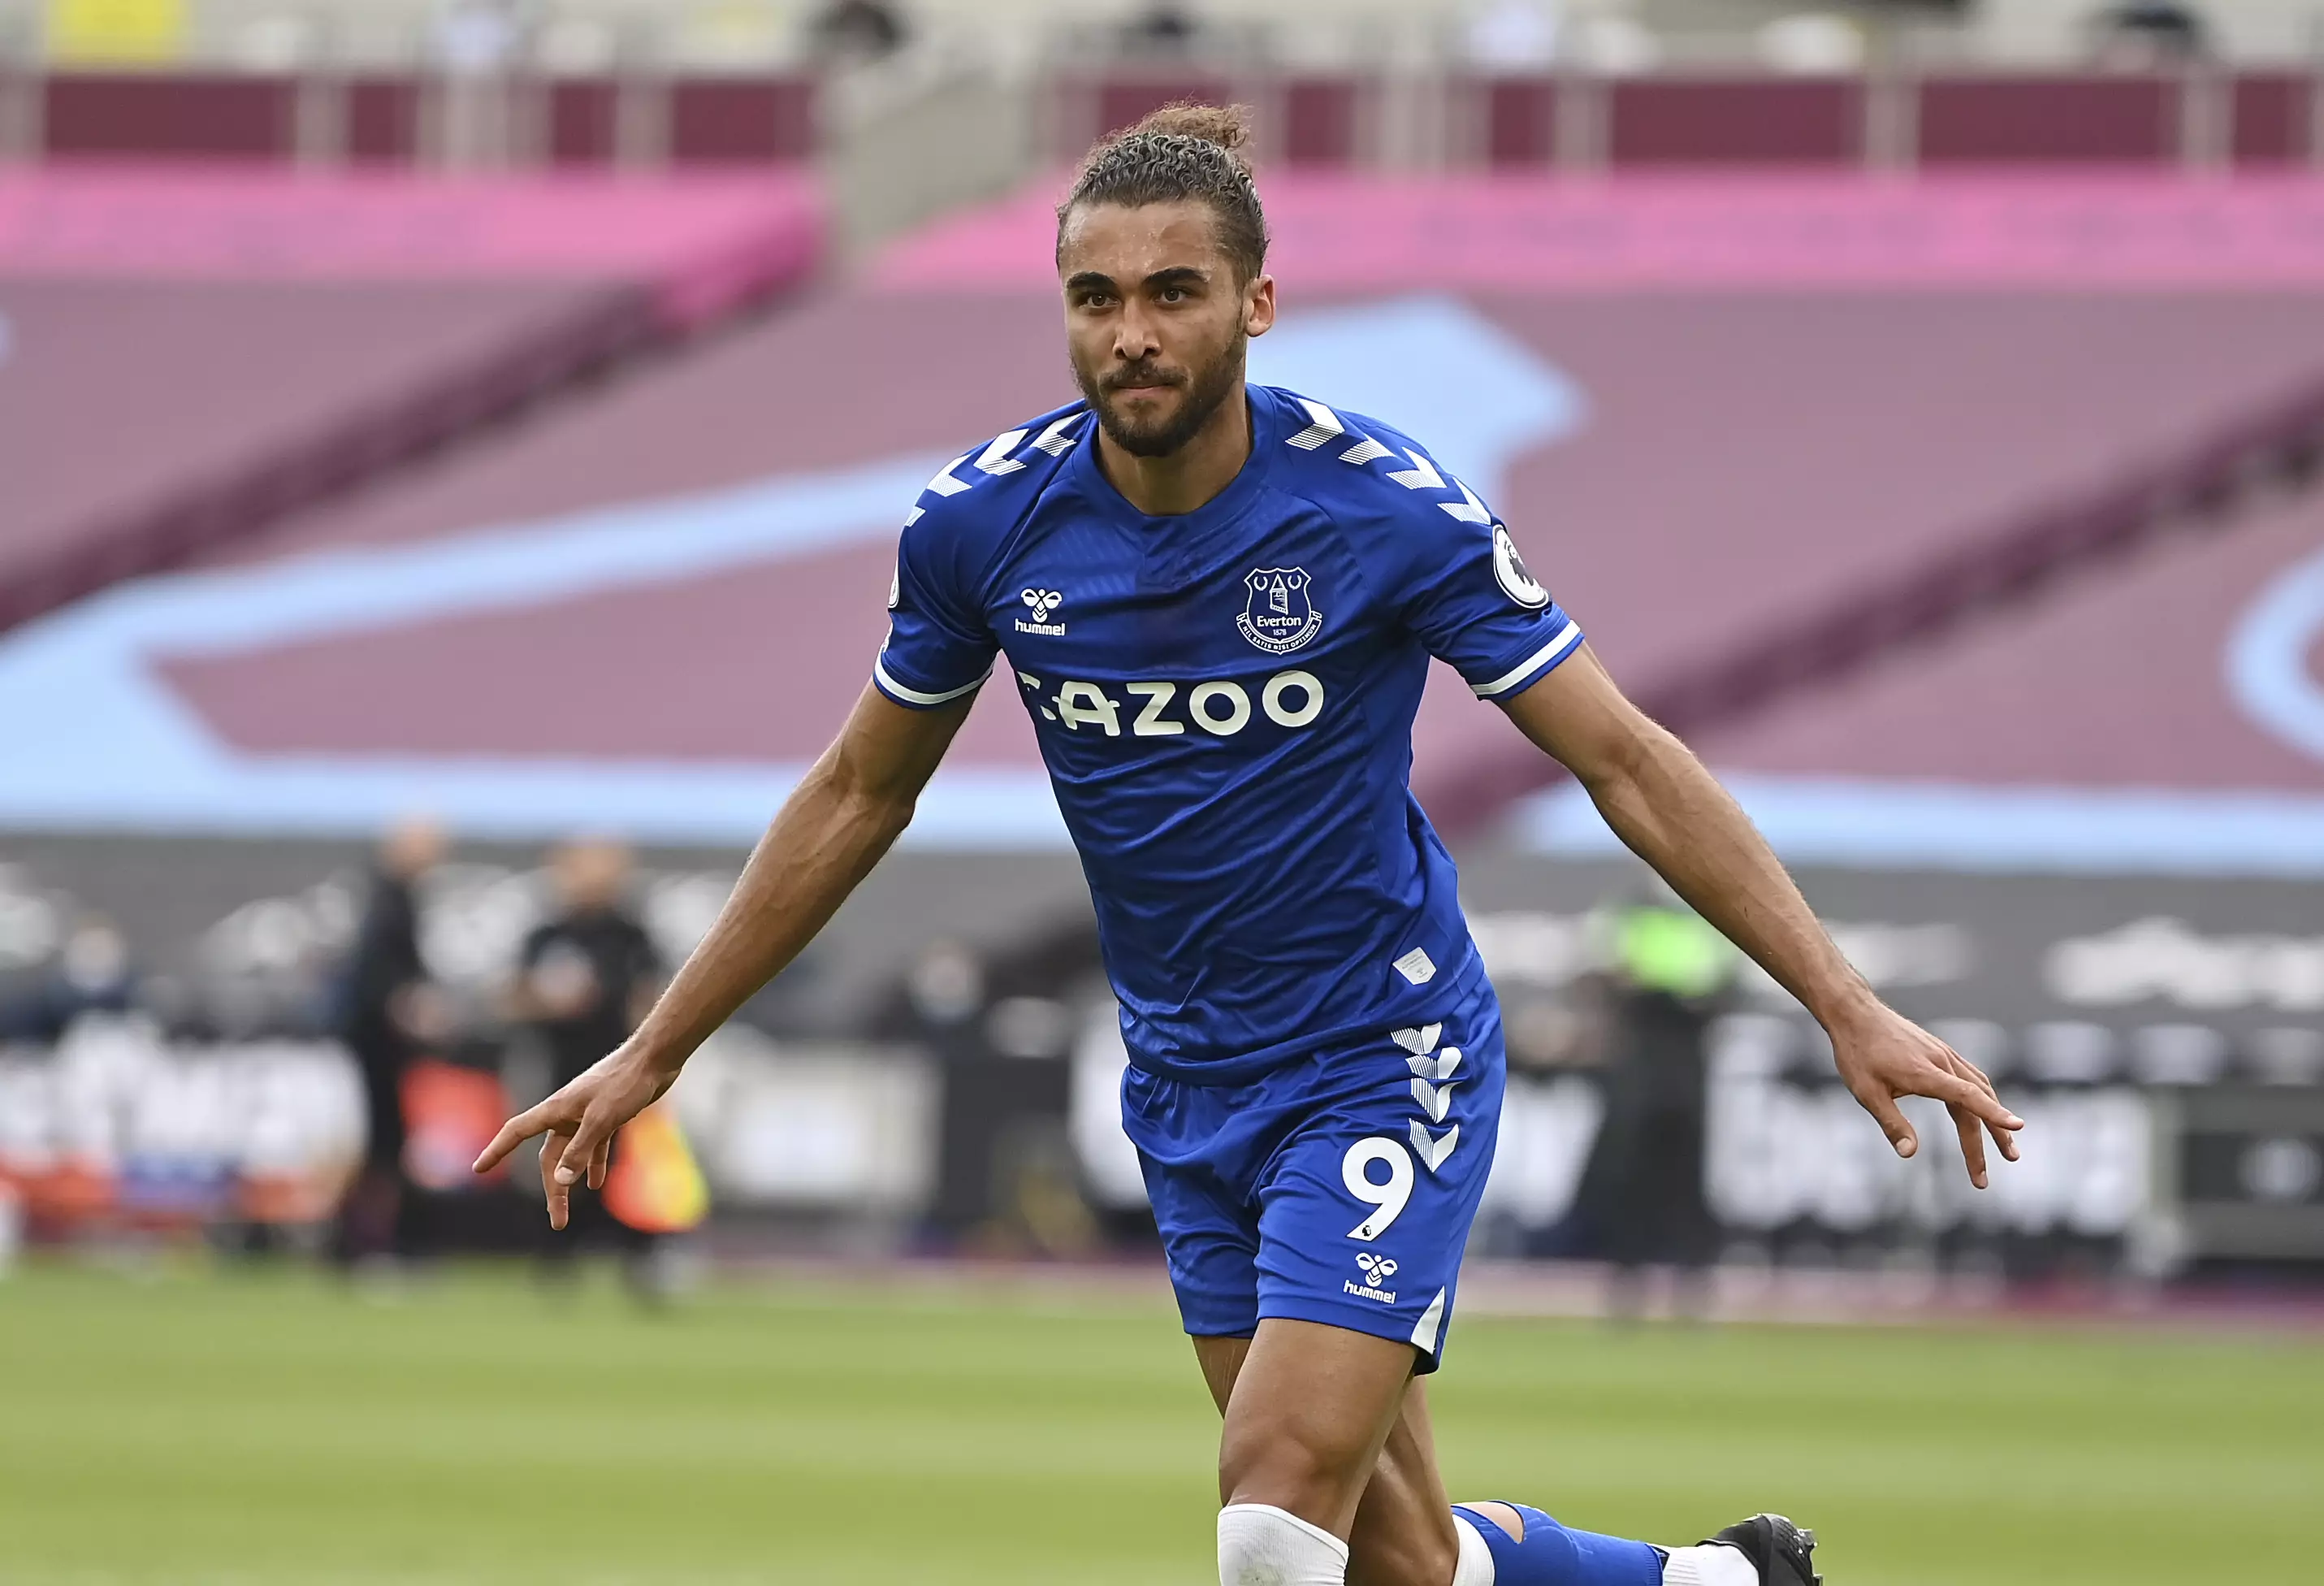 Dominic Calvert-Lewin has rediscovered his early-season form